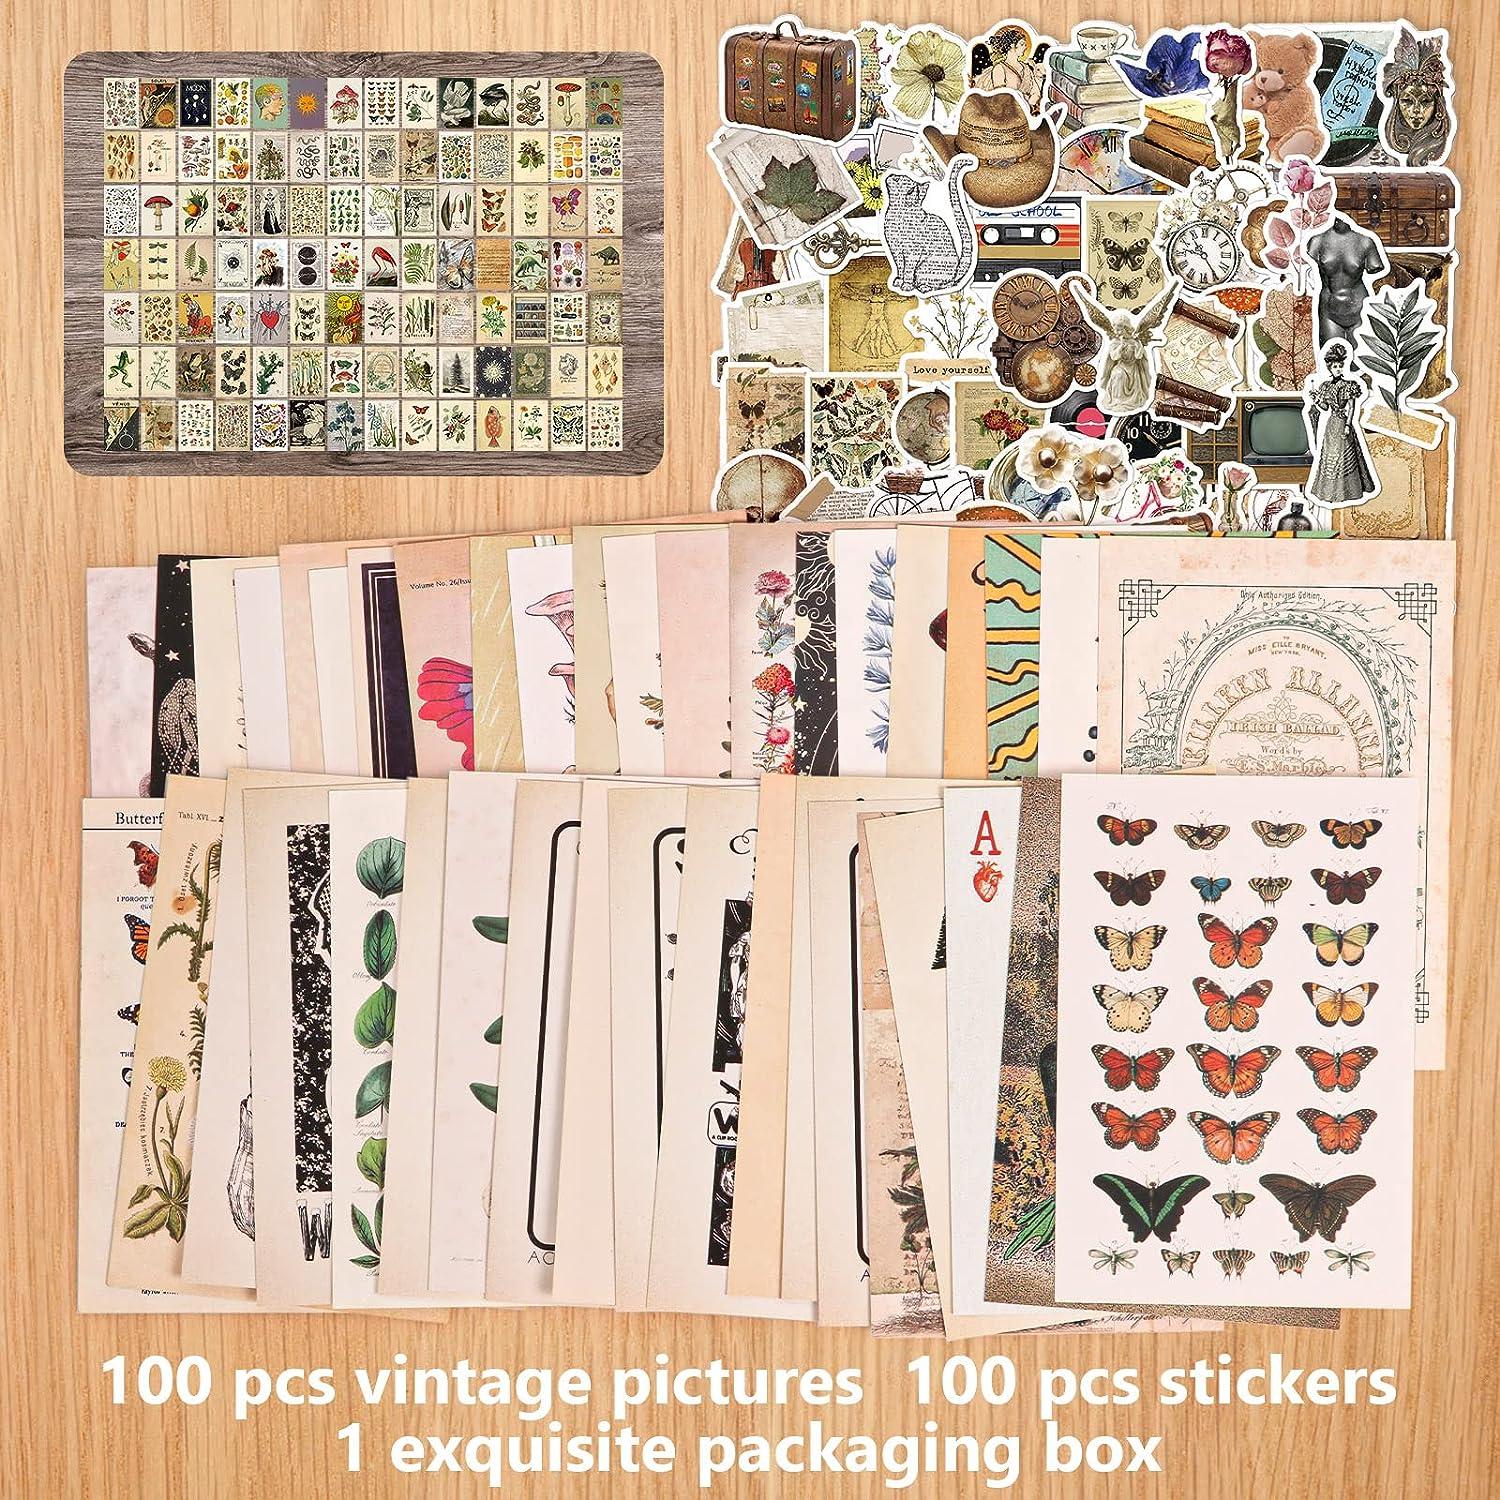 puthiac 200PCS Vintage Photo Wall Collage Kit Aesthetic Posters and Vintage  Stickers Double-Sided Printed Aesthetic Pictures Stickers for Cottagecore  Vintage Room Decor and Scrapbooking Supplies Kit